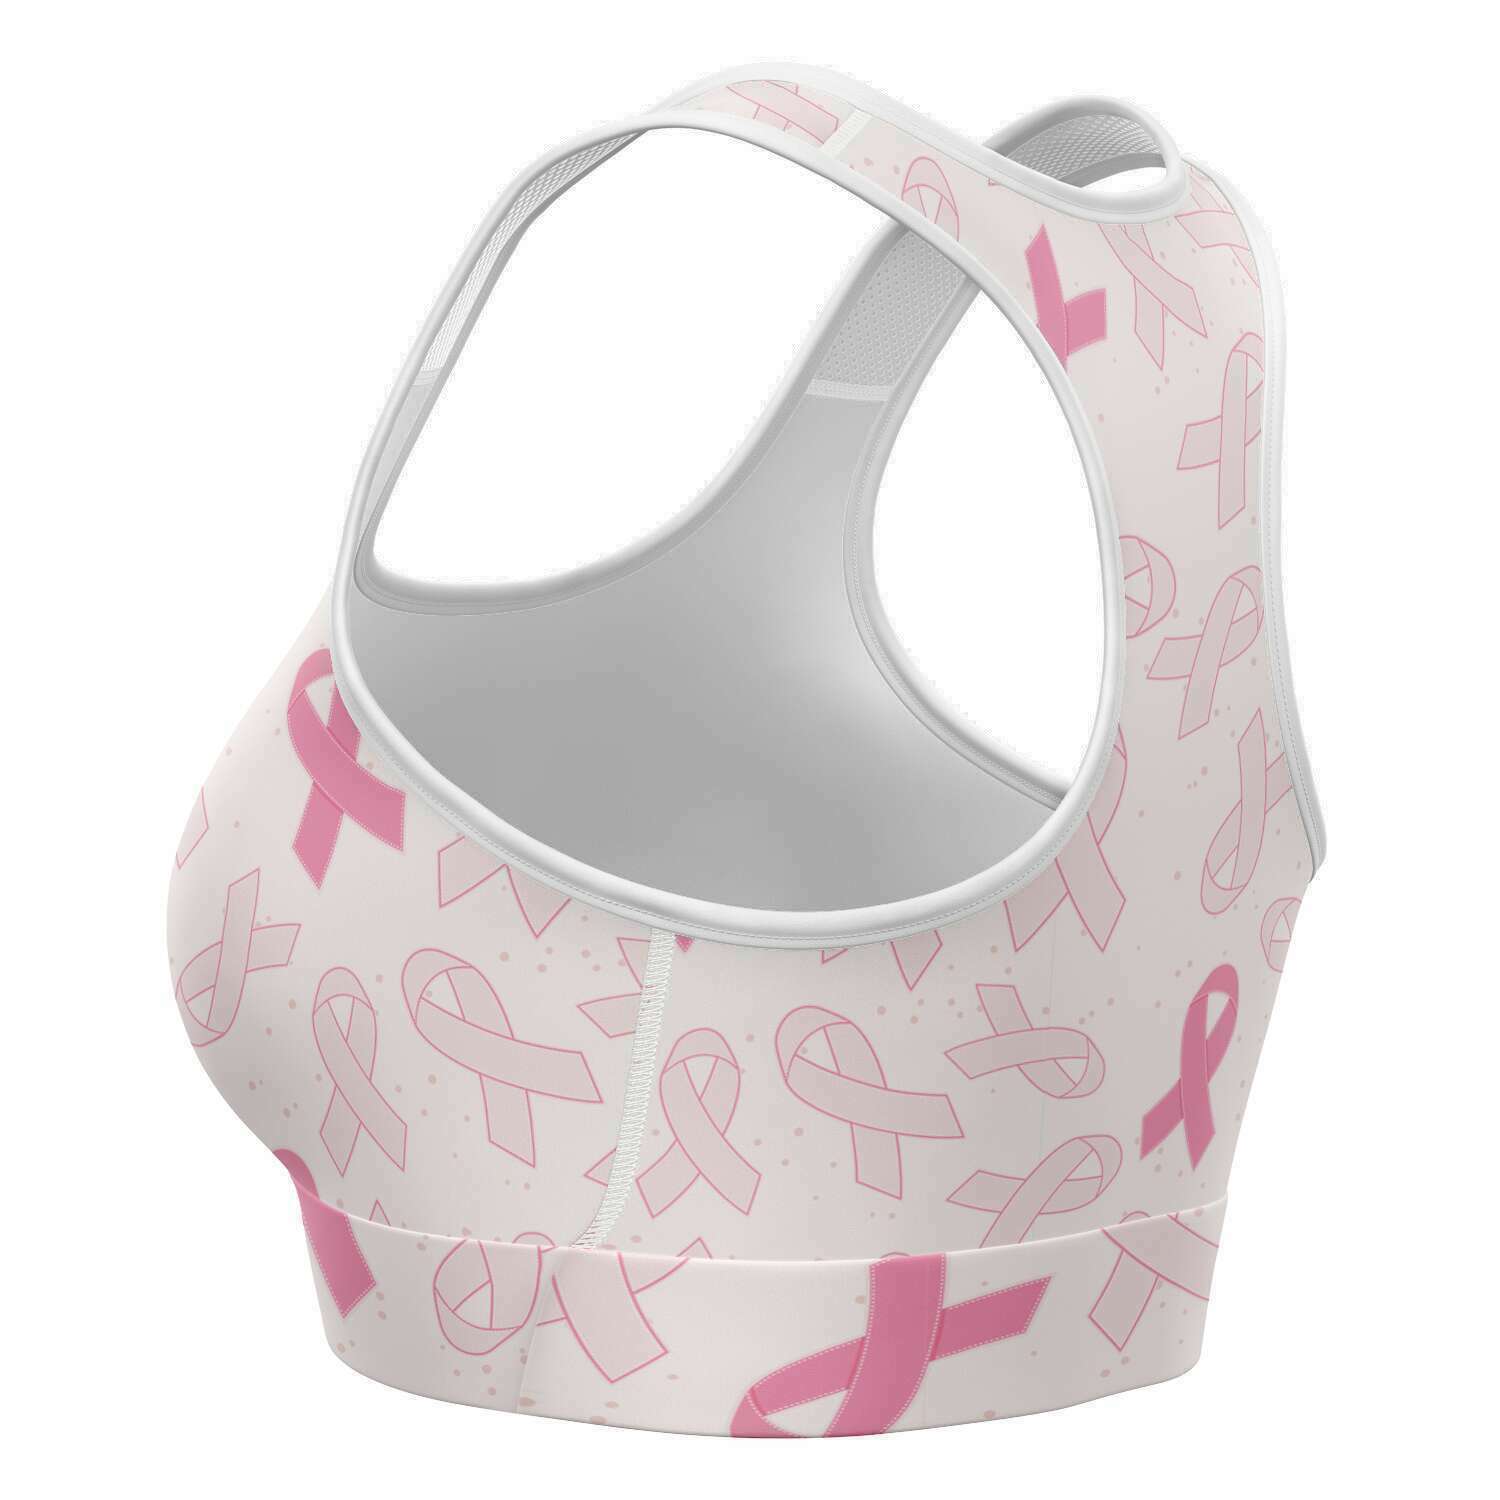 Women's Breast Cancer Awareness Month Athletic Sports Bra